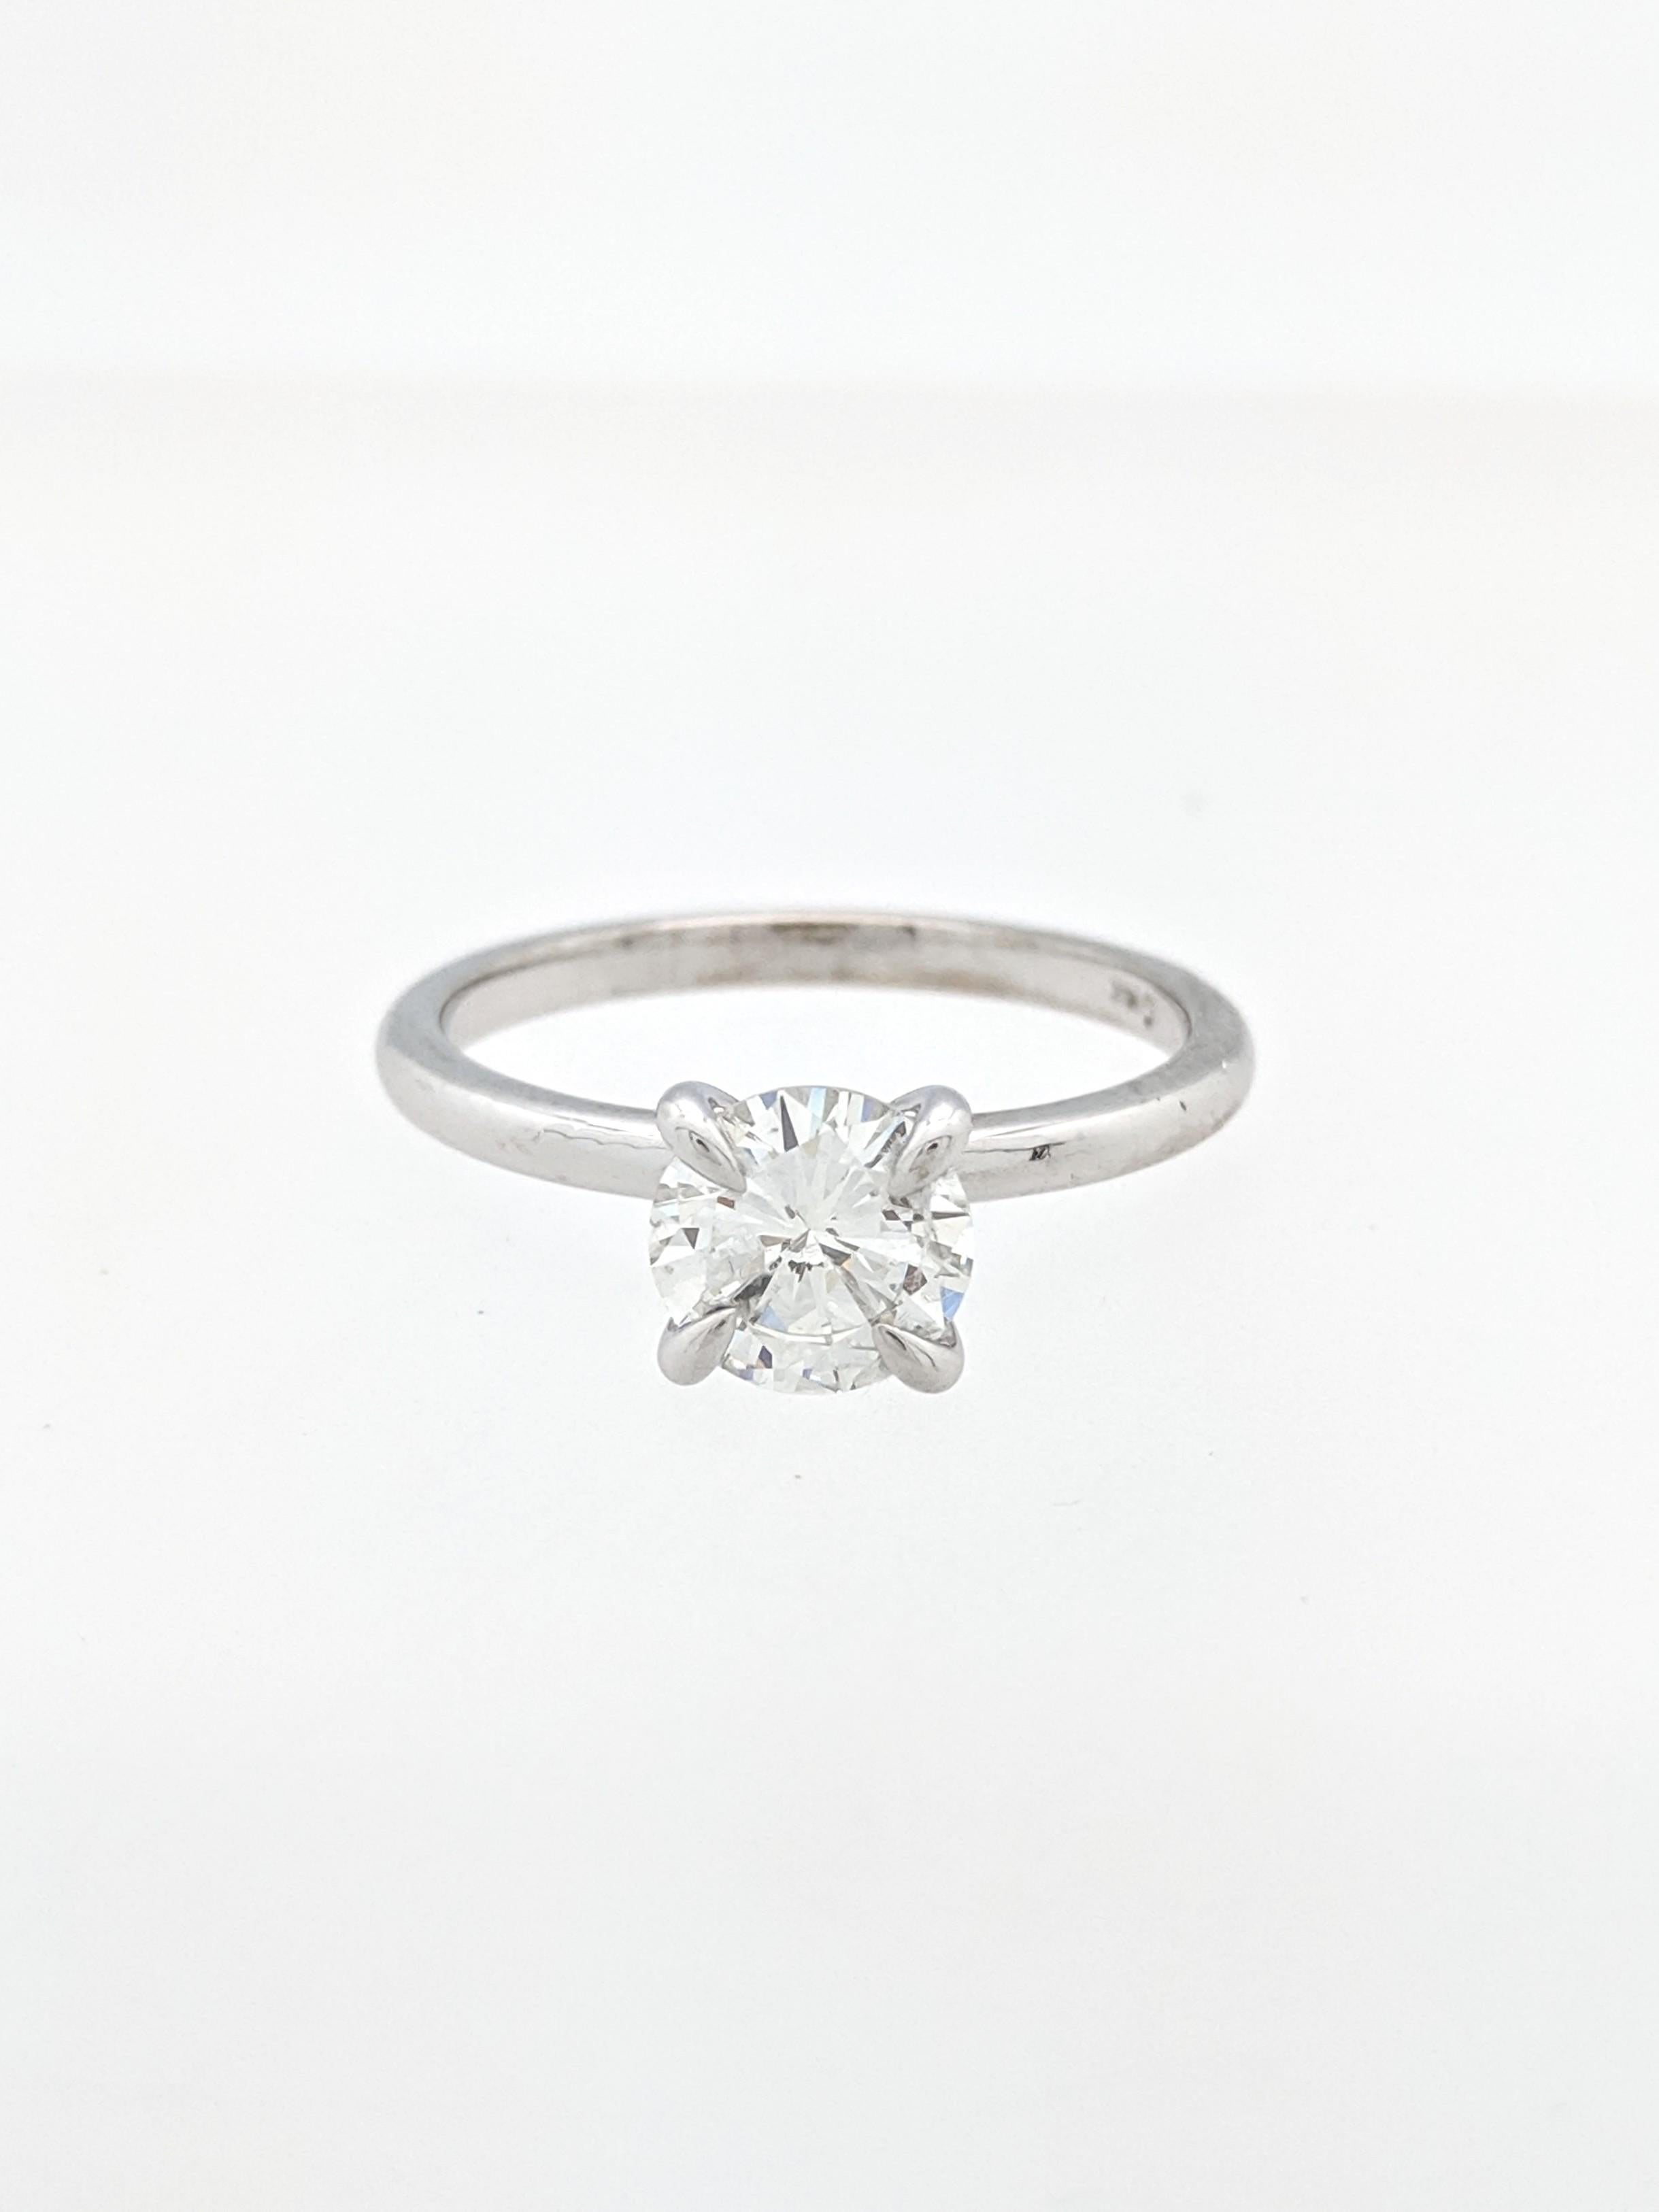 1.02 Carat Round Brilliant Cut Natural Diamond Ring GIA Certified SI1/J In New Condition For Sale In Gainesville, FL